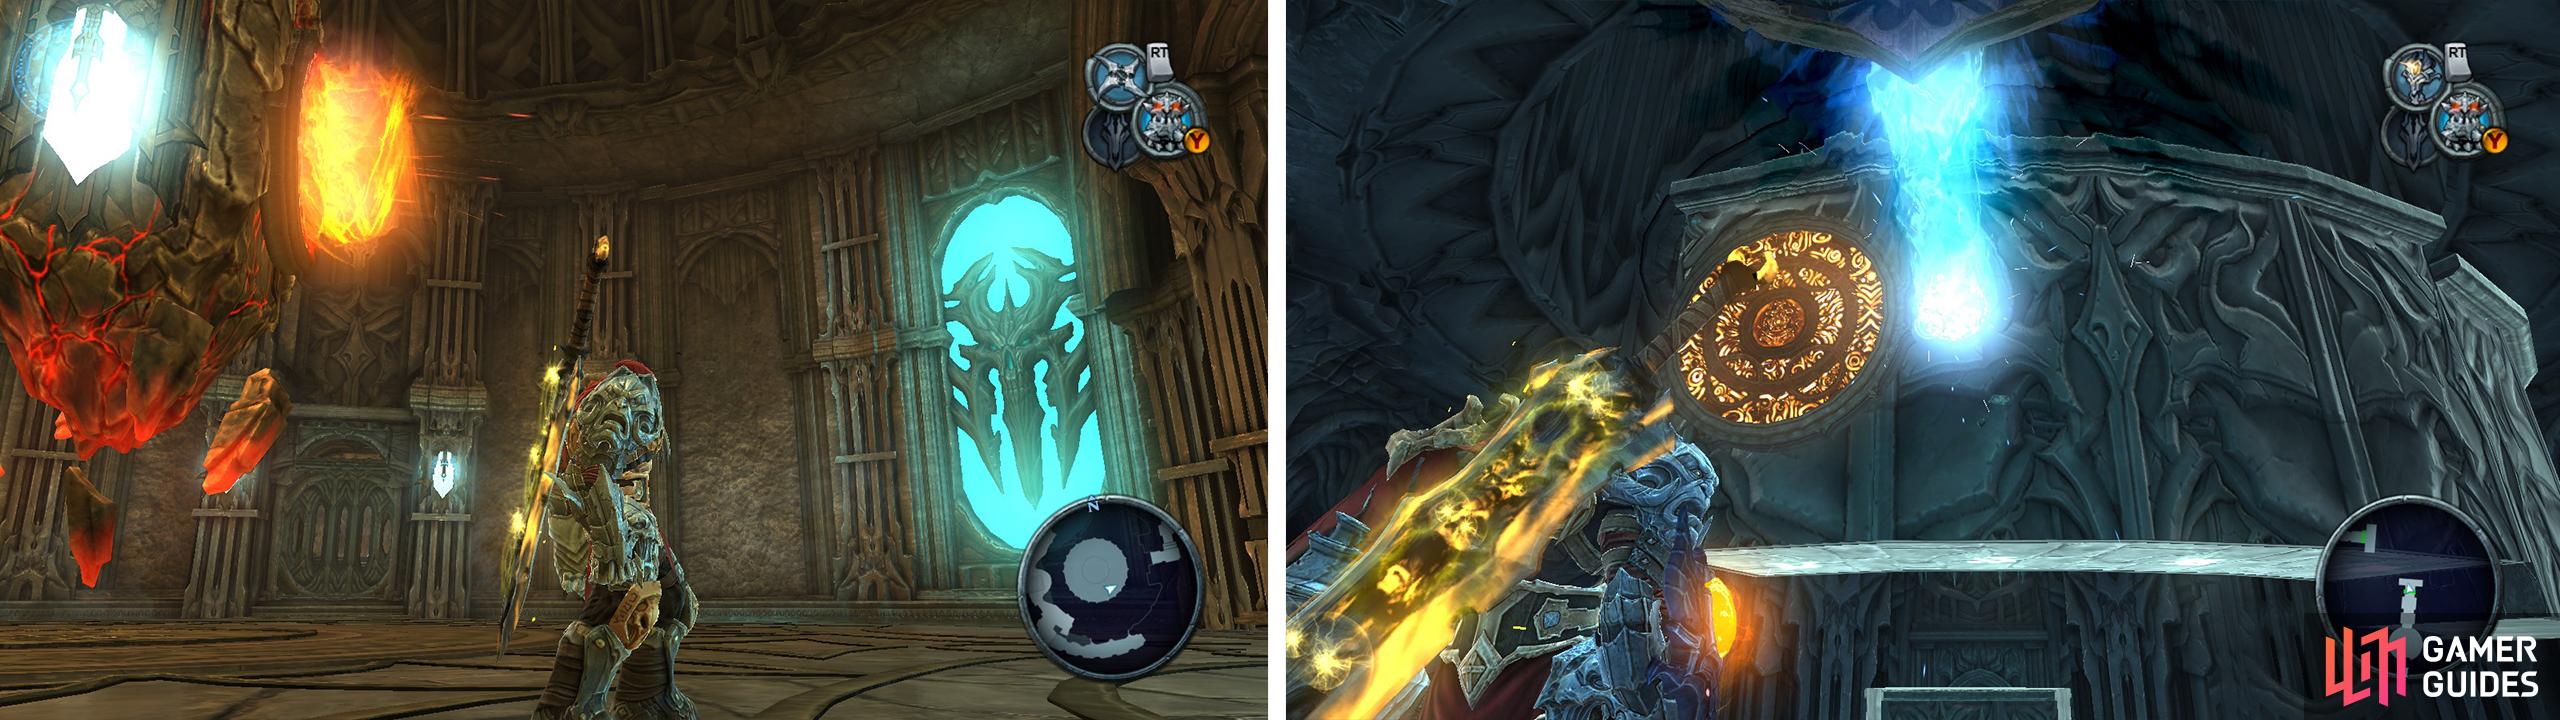 After hitting the chronosphere, hit the crystal on the hanging platform and the two crystals by the door (left). Back in Azraels chamber, put a portal on the pad that passes by (right).